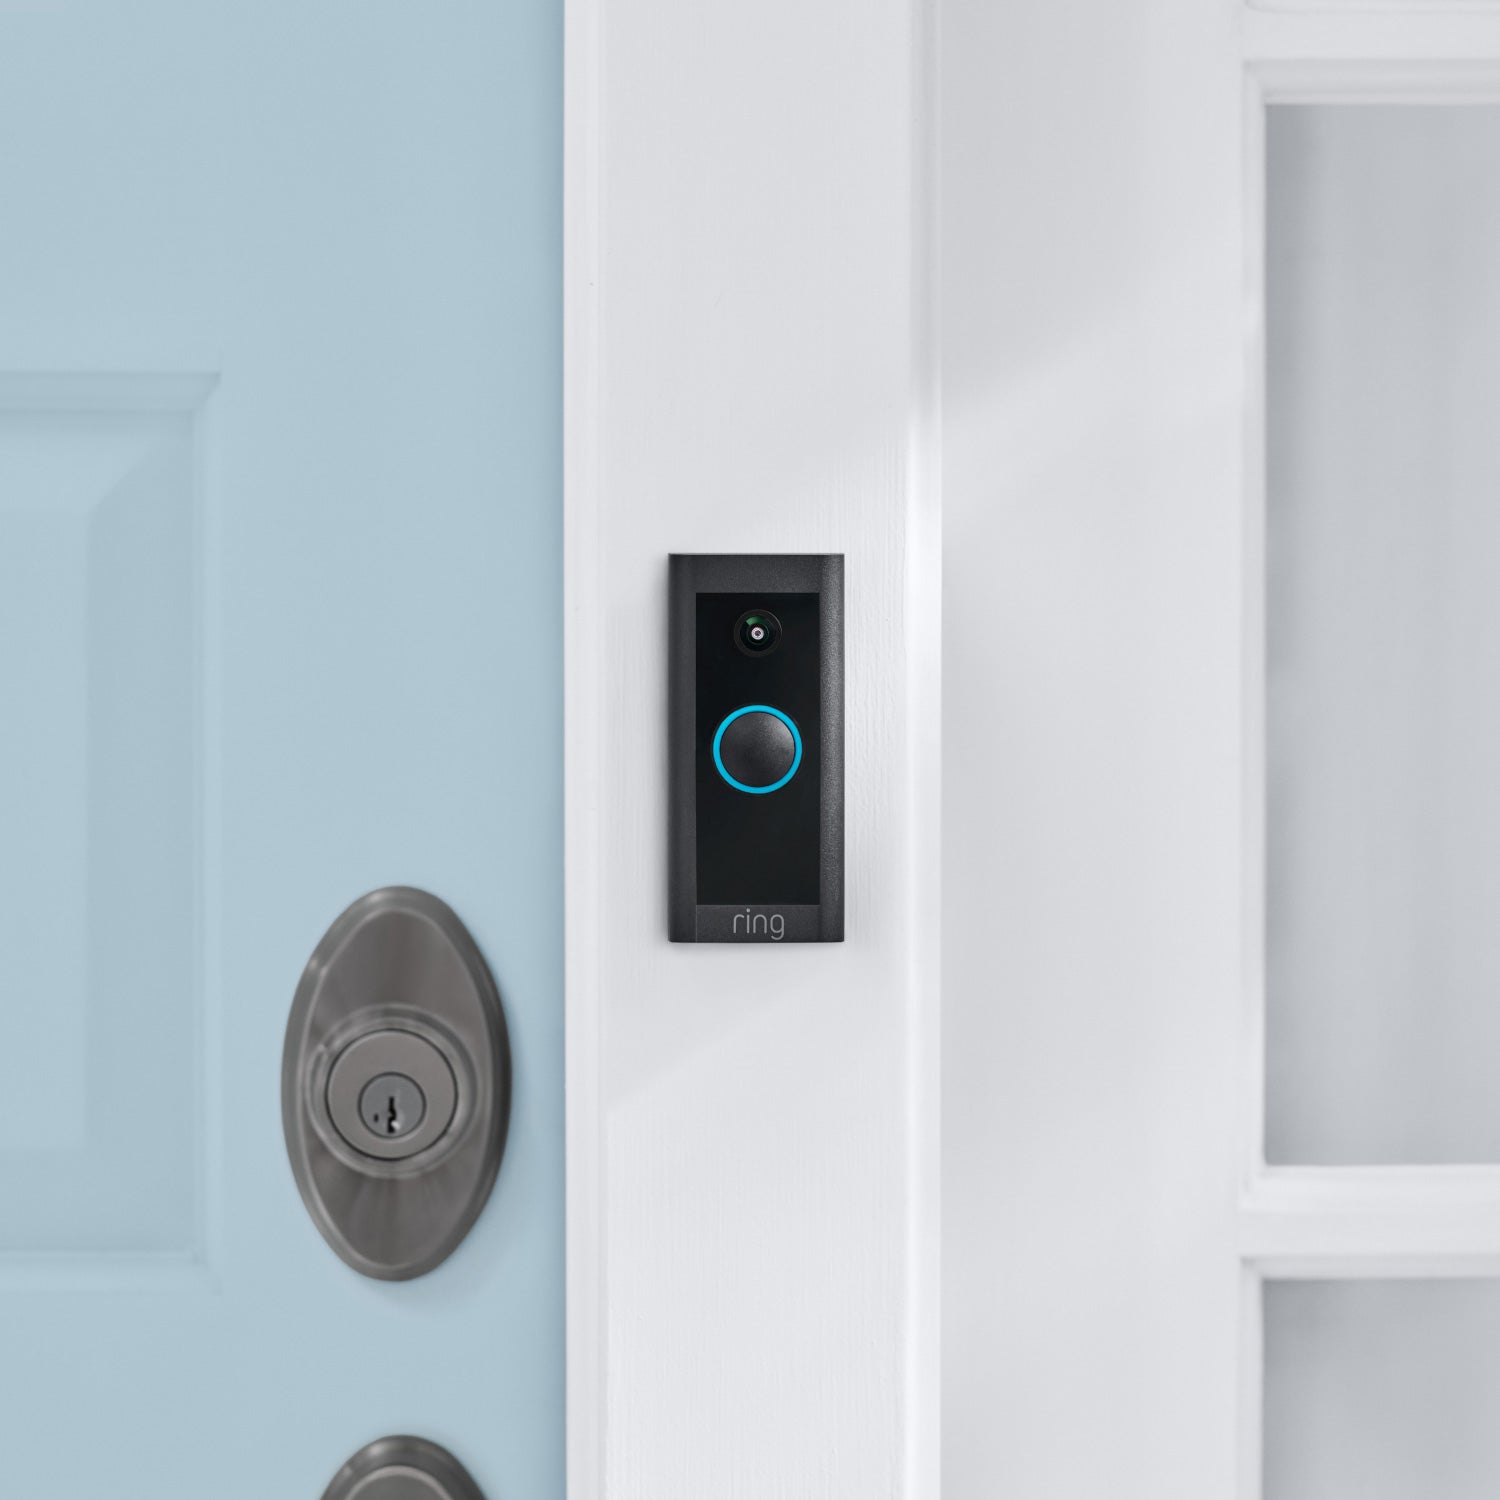 Video Doorbell Wired - Video Doorbell Wired in black, installed on exterior of home next to light blue front door.